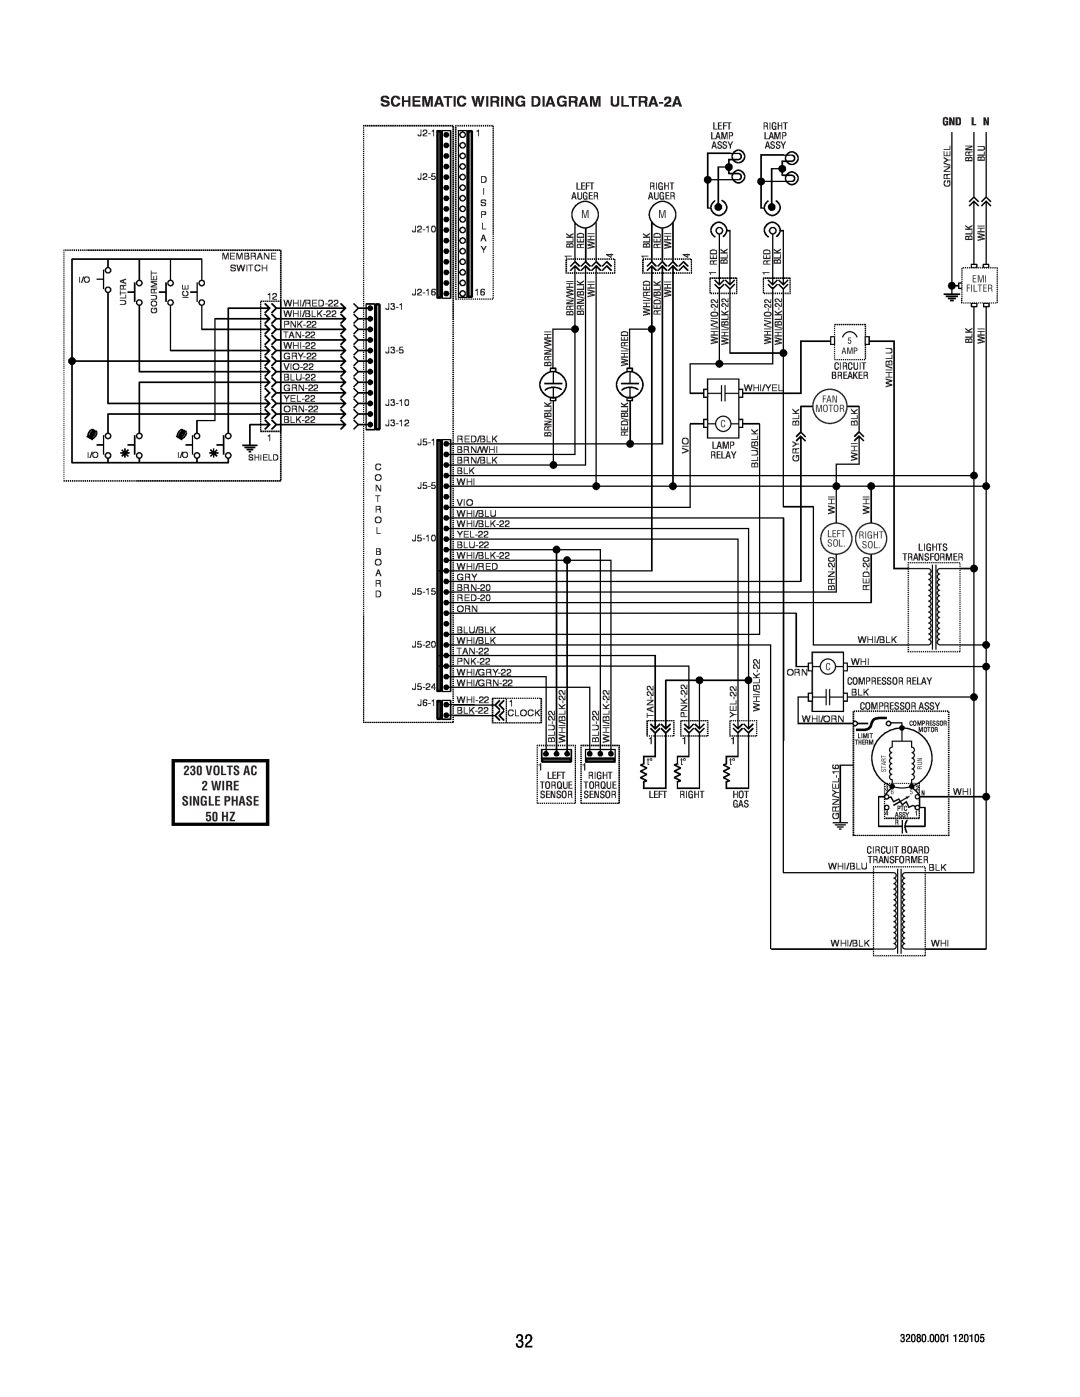 Bunn manual SCHEMATIC WIRING DIAGRAM ULTRA-2A, Volts Ac, Wire, Single Phase, 50 HZ, 32080.0001 